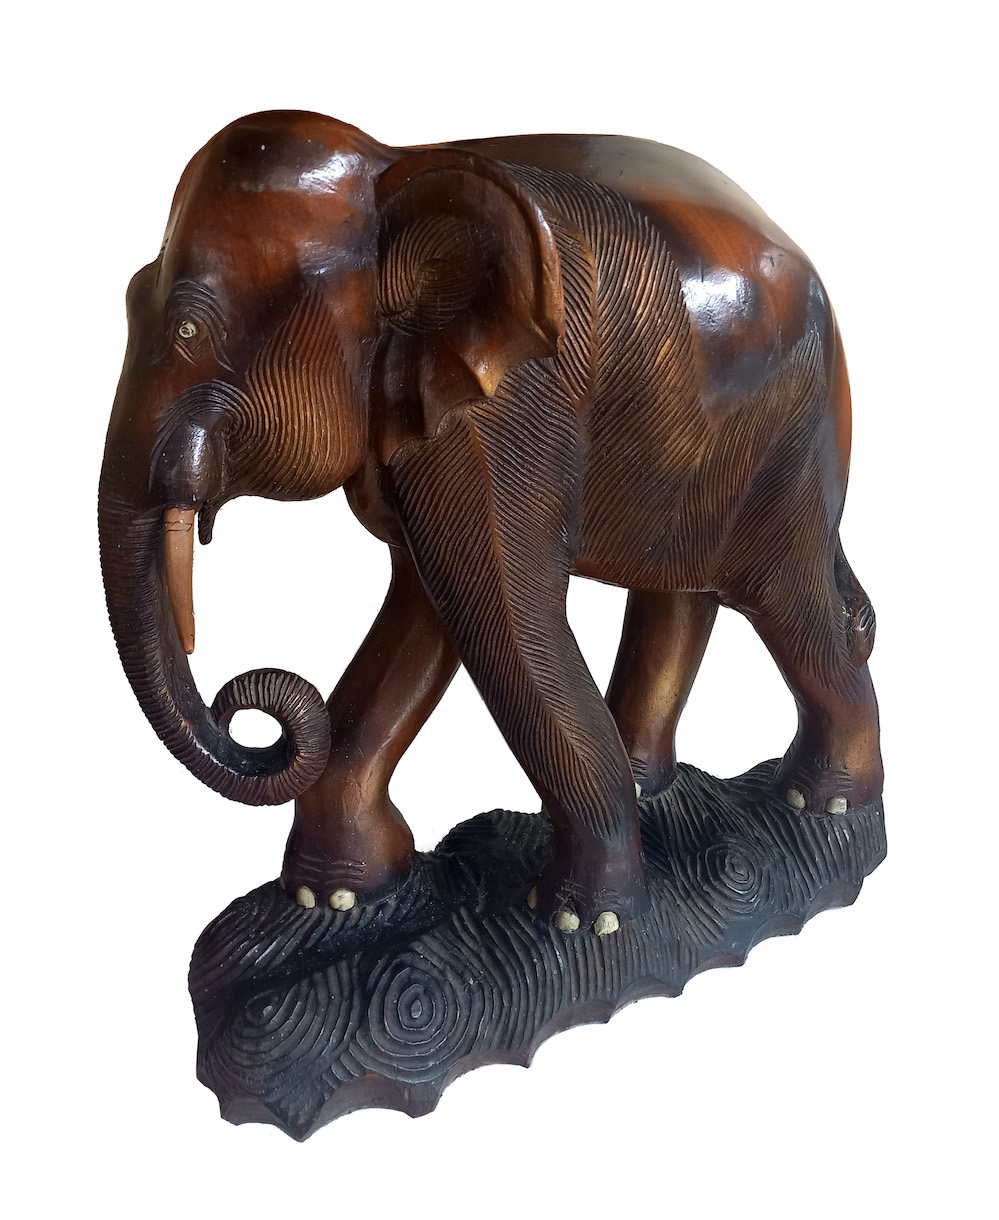 A carved wood model of standing elephant